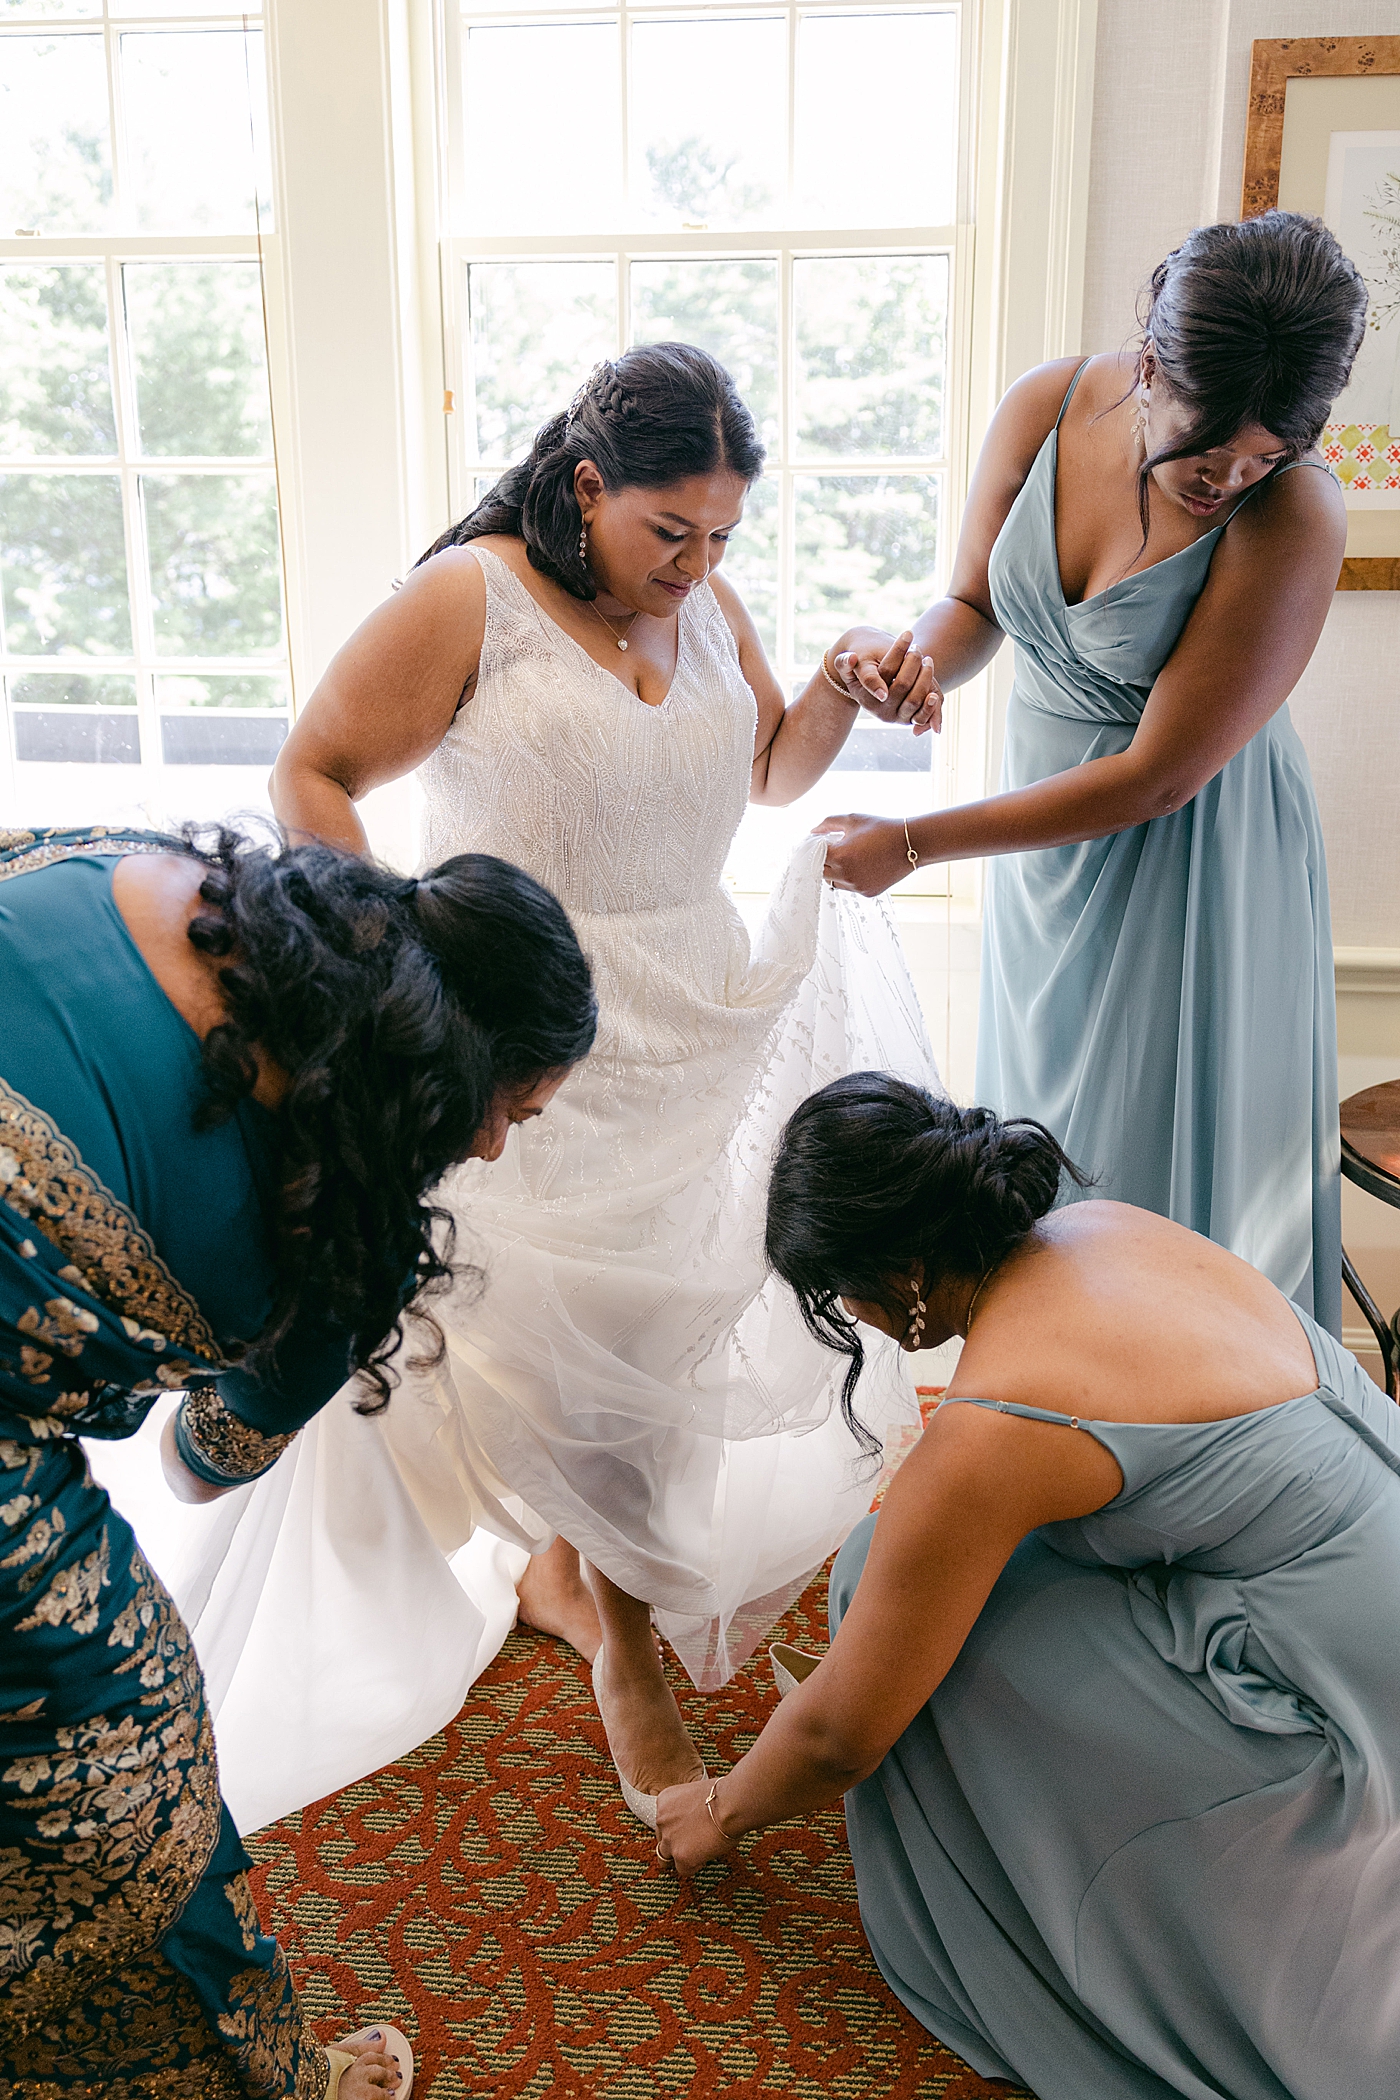 Bridesmaids helping a bride into her wedding dress | Image by Hope Helmuth Photography